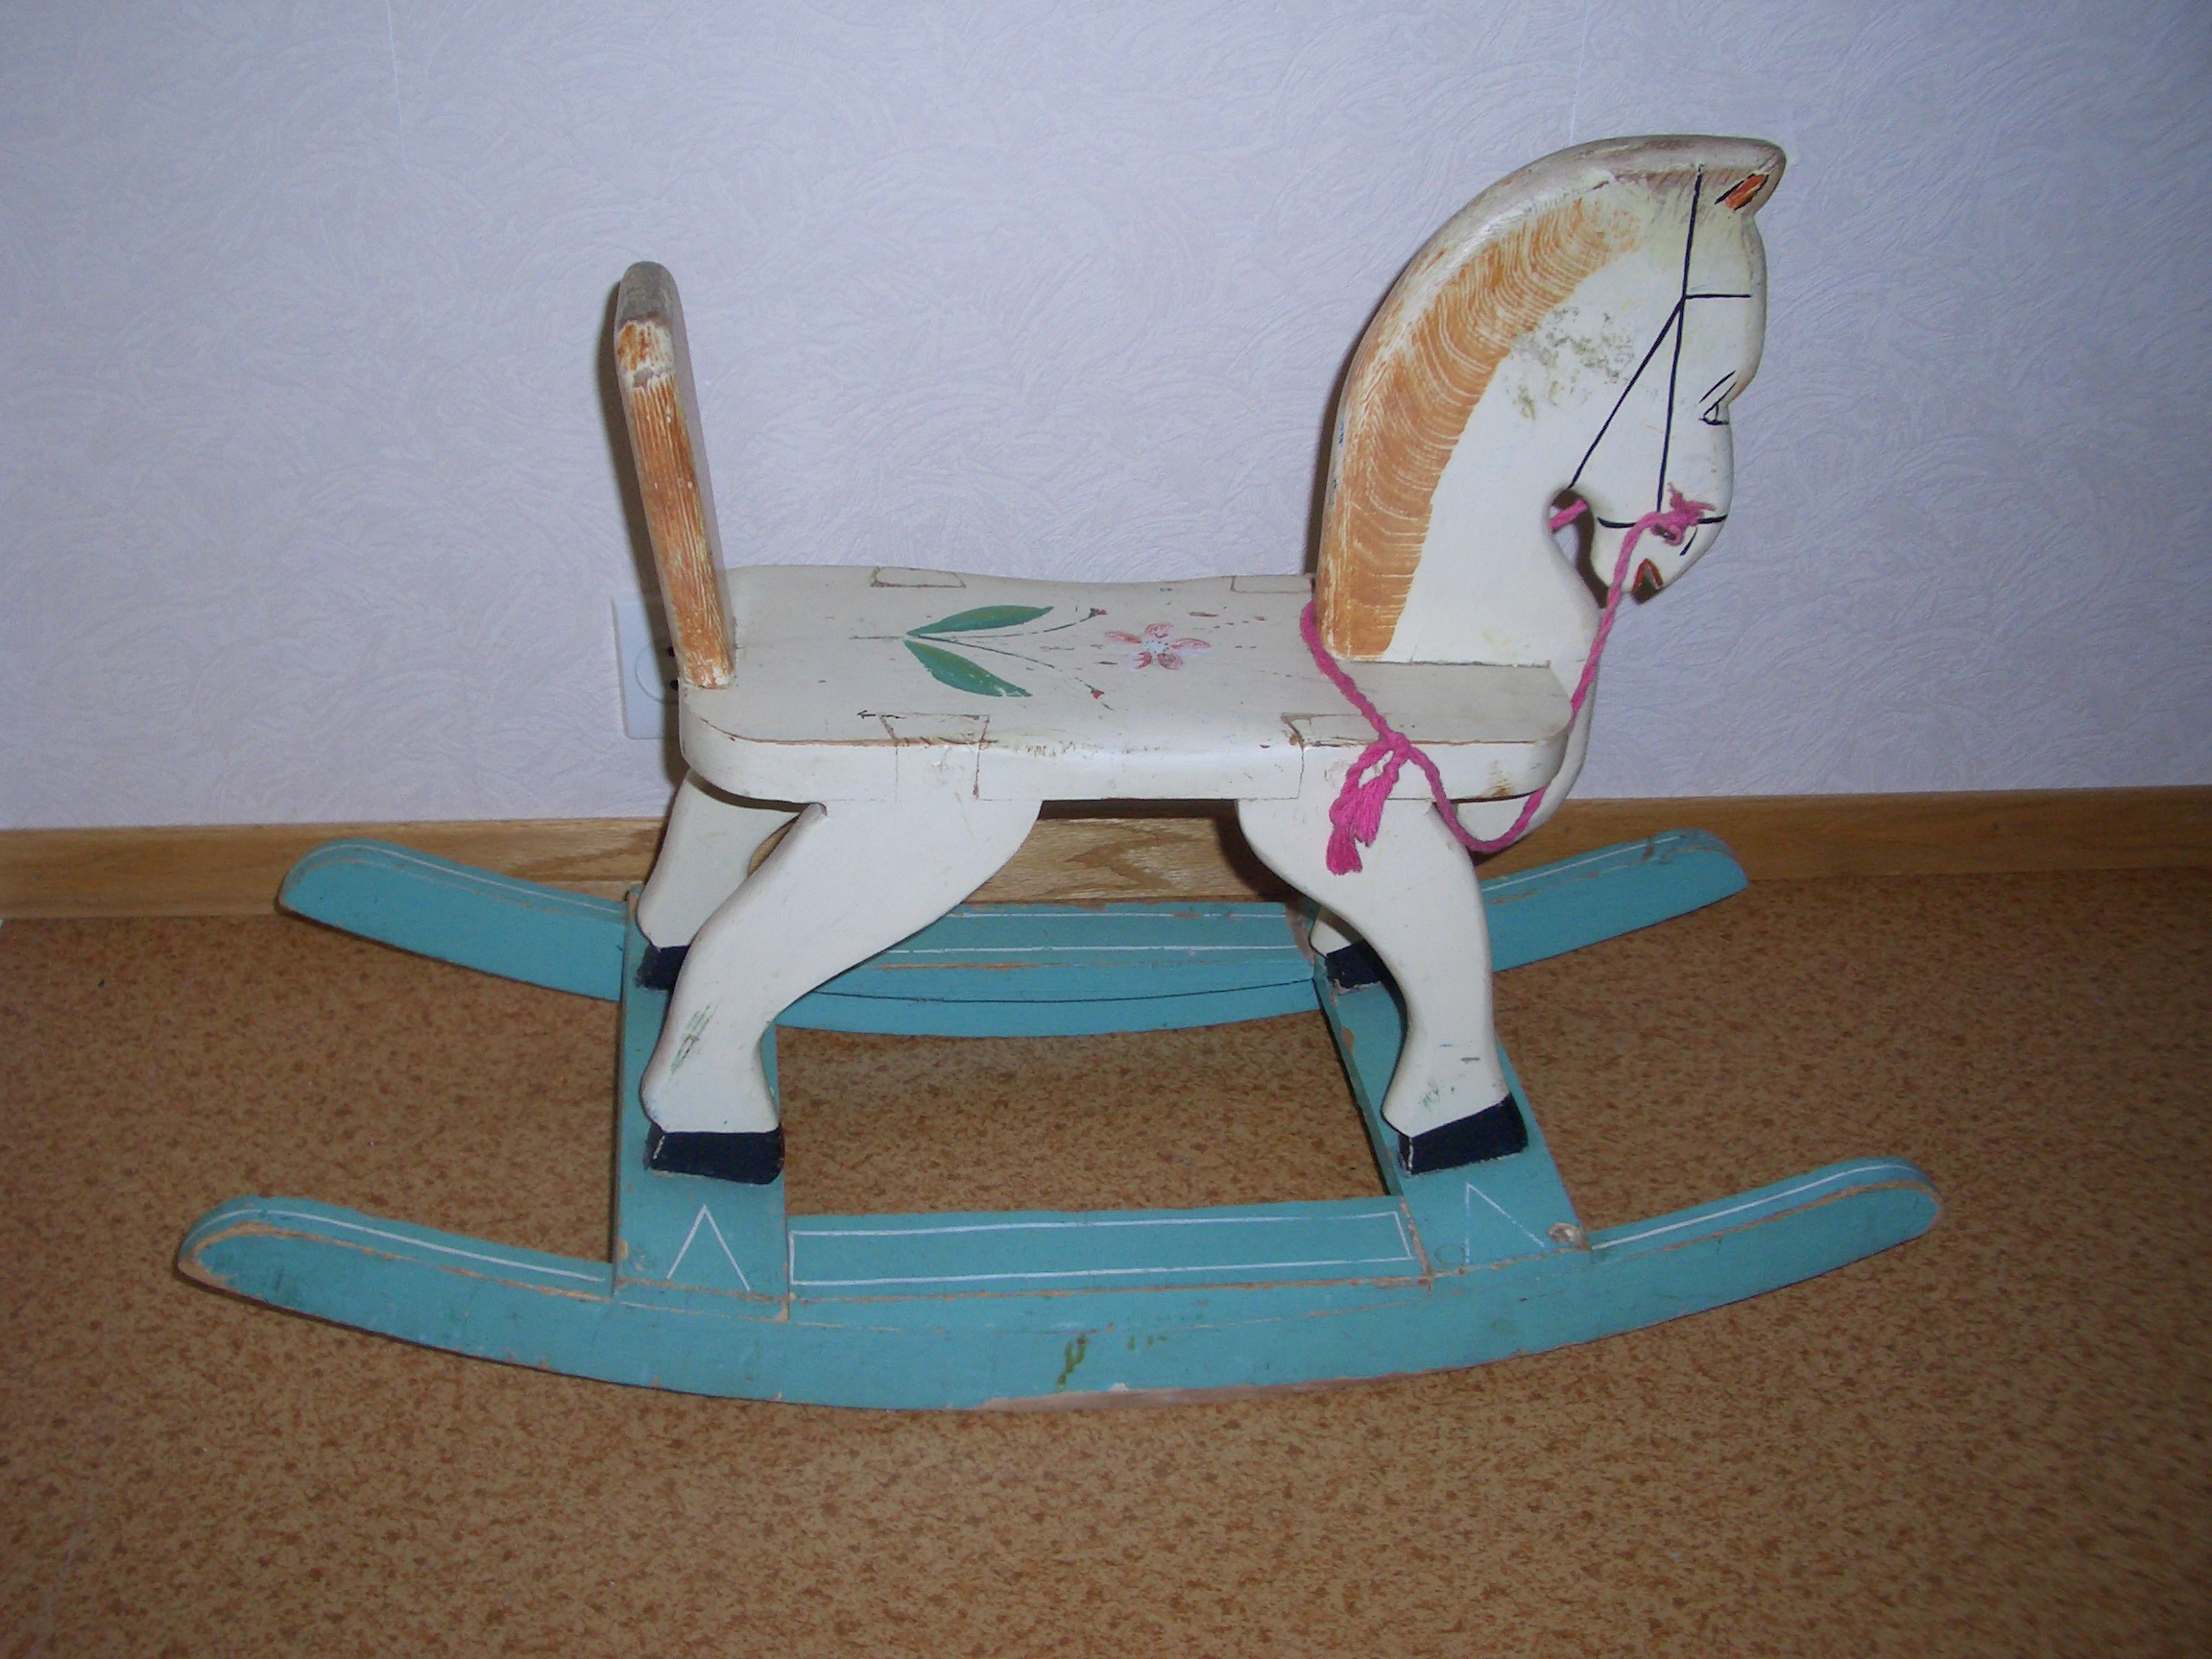  wooden toy horse plans Woodworking labor Paper Plan to Build 4 Wooden